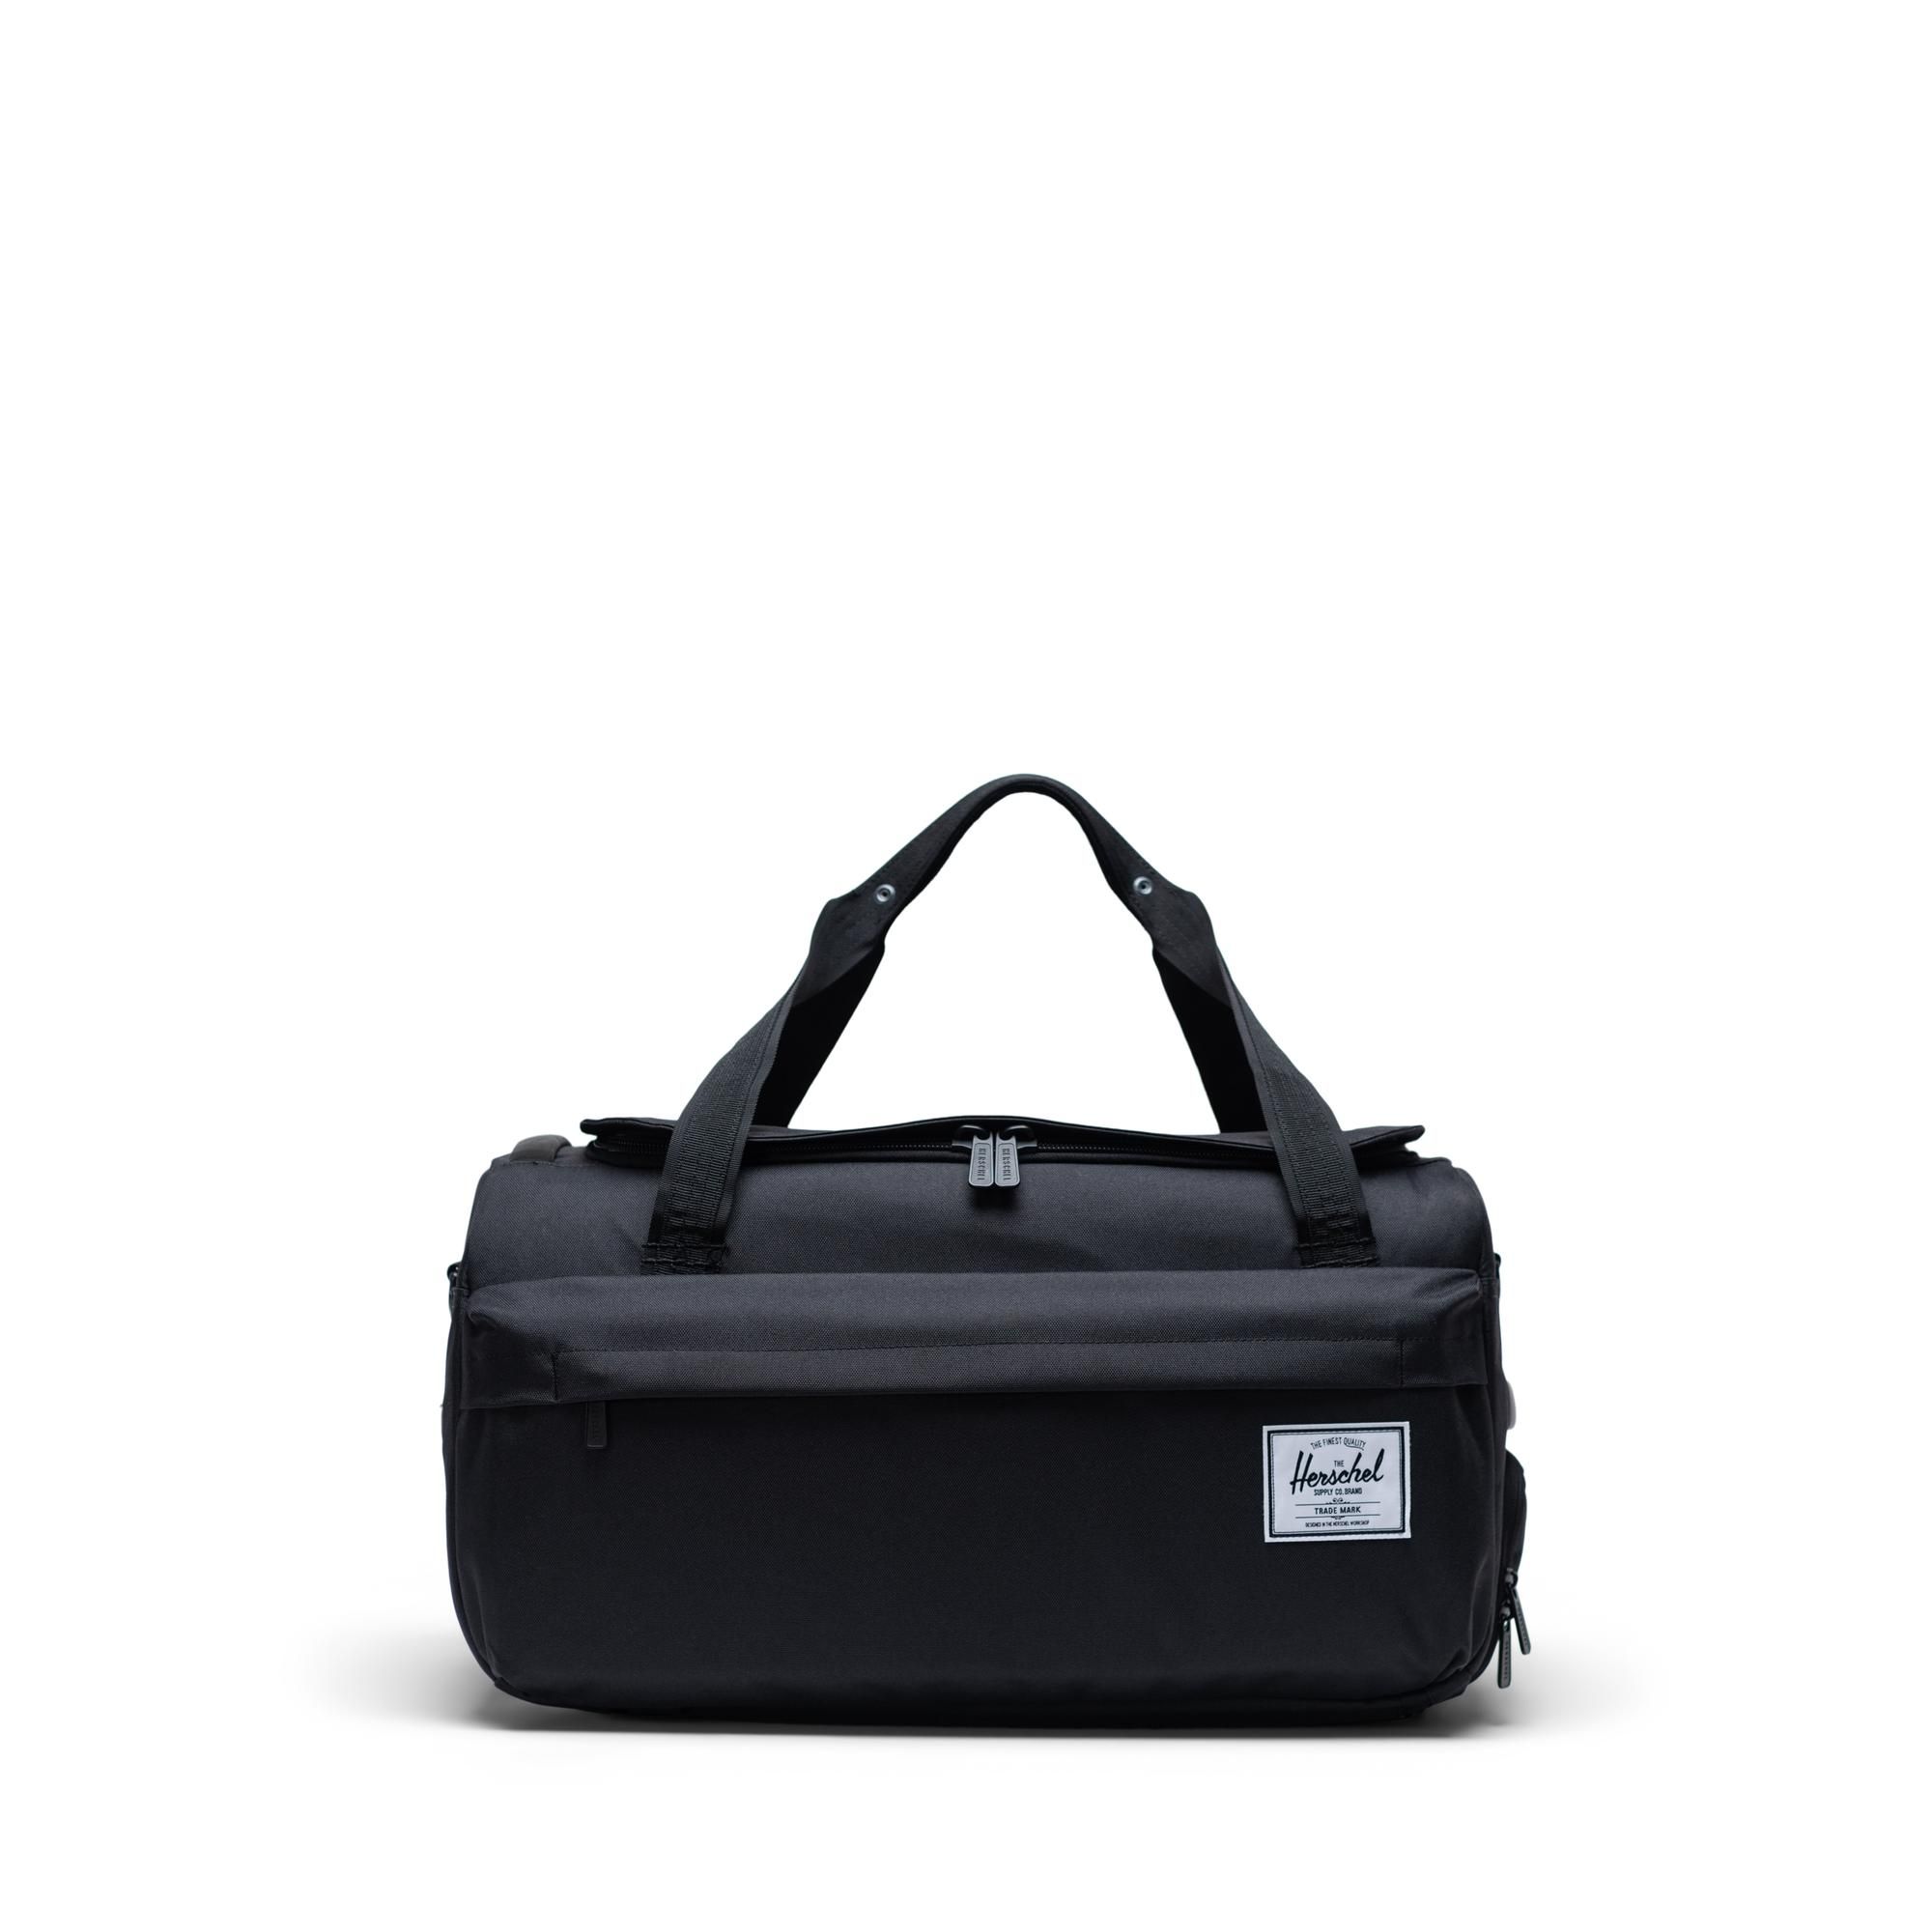 Outfitter Luggage 30L | Herschel Supply Company